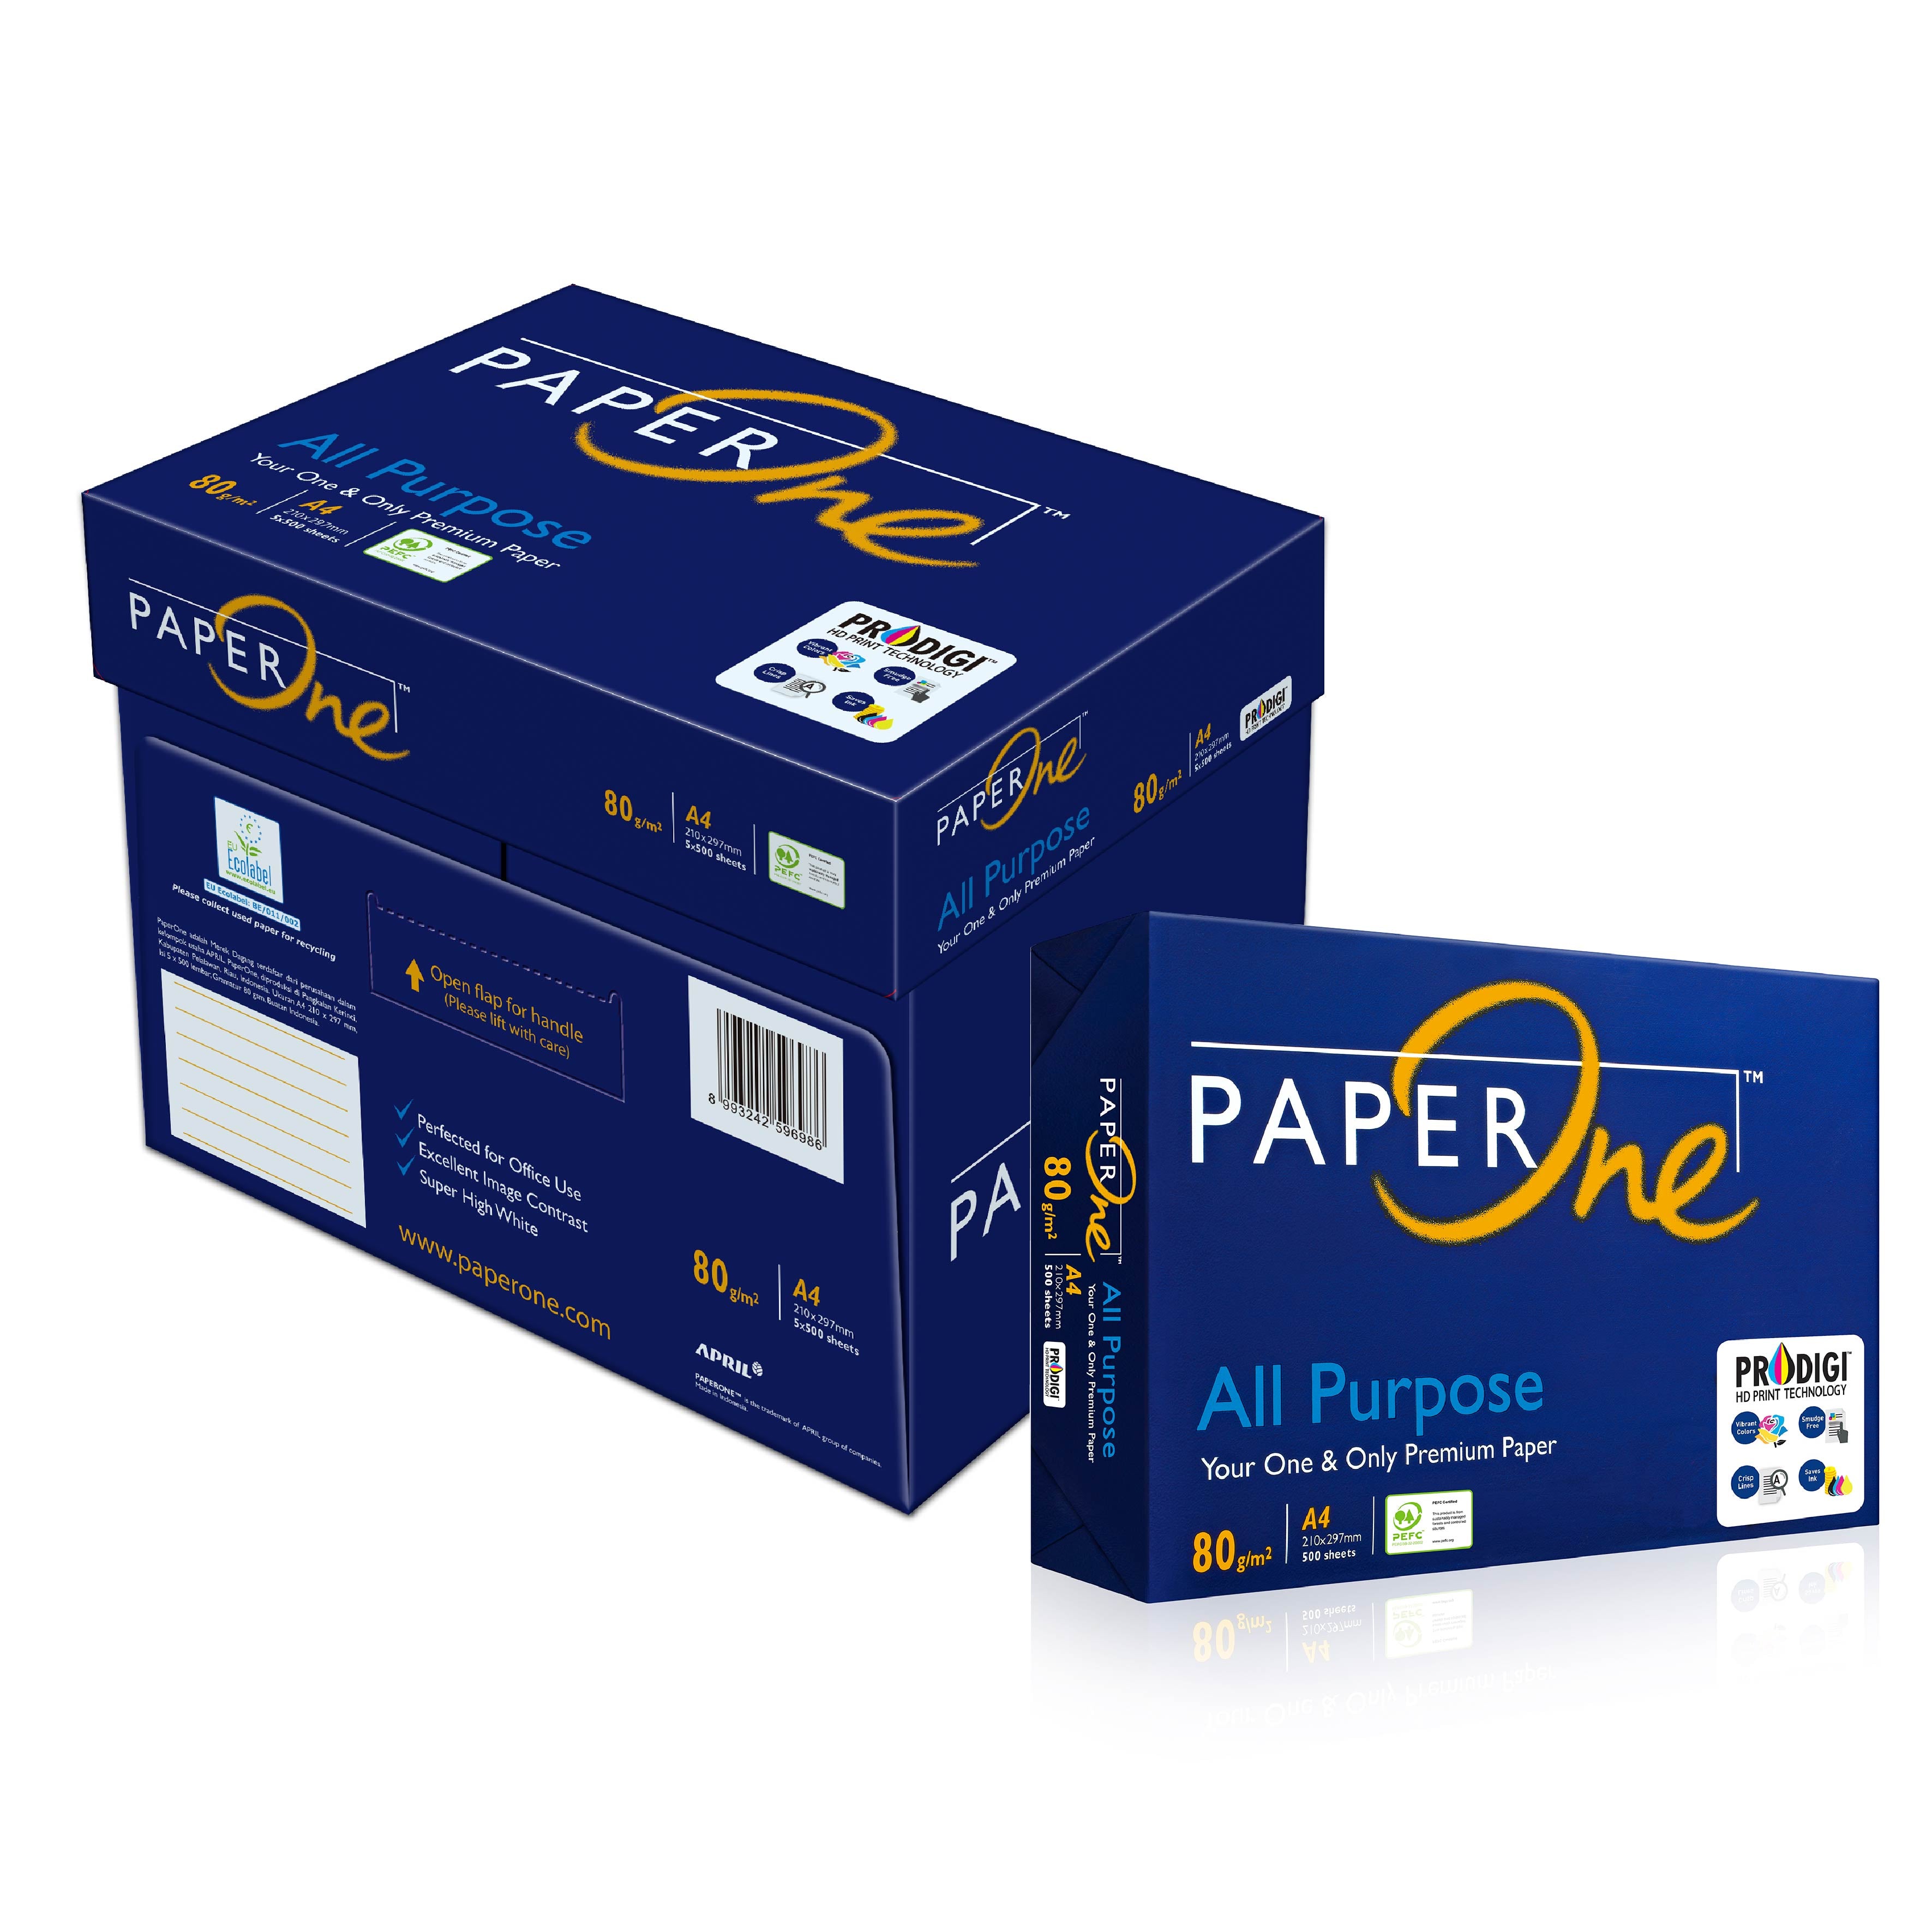 PAPERONE Copier Paper (A4) 80GSM 500'S [Buy 4 Ream Free 1 Ream] - ECTL-AUG23, ECTL-NETTPRICE, FEATURED, PAPER, PAPERONE, SALE